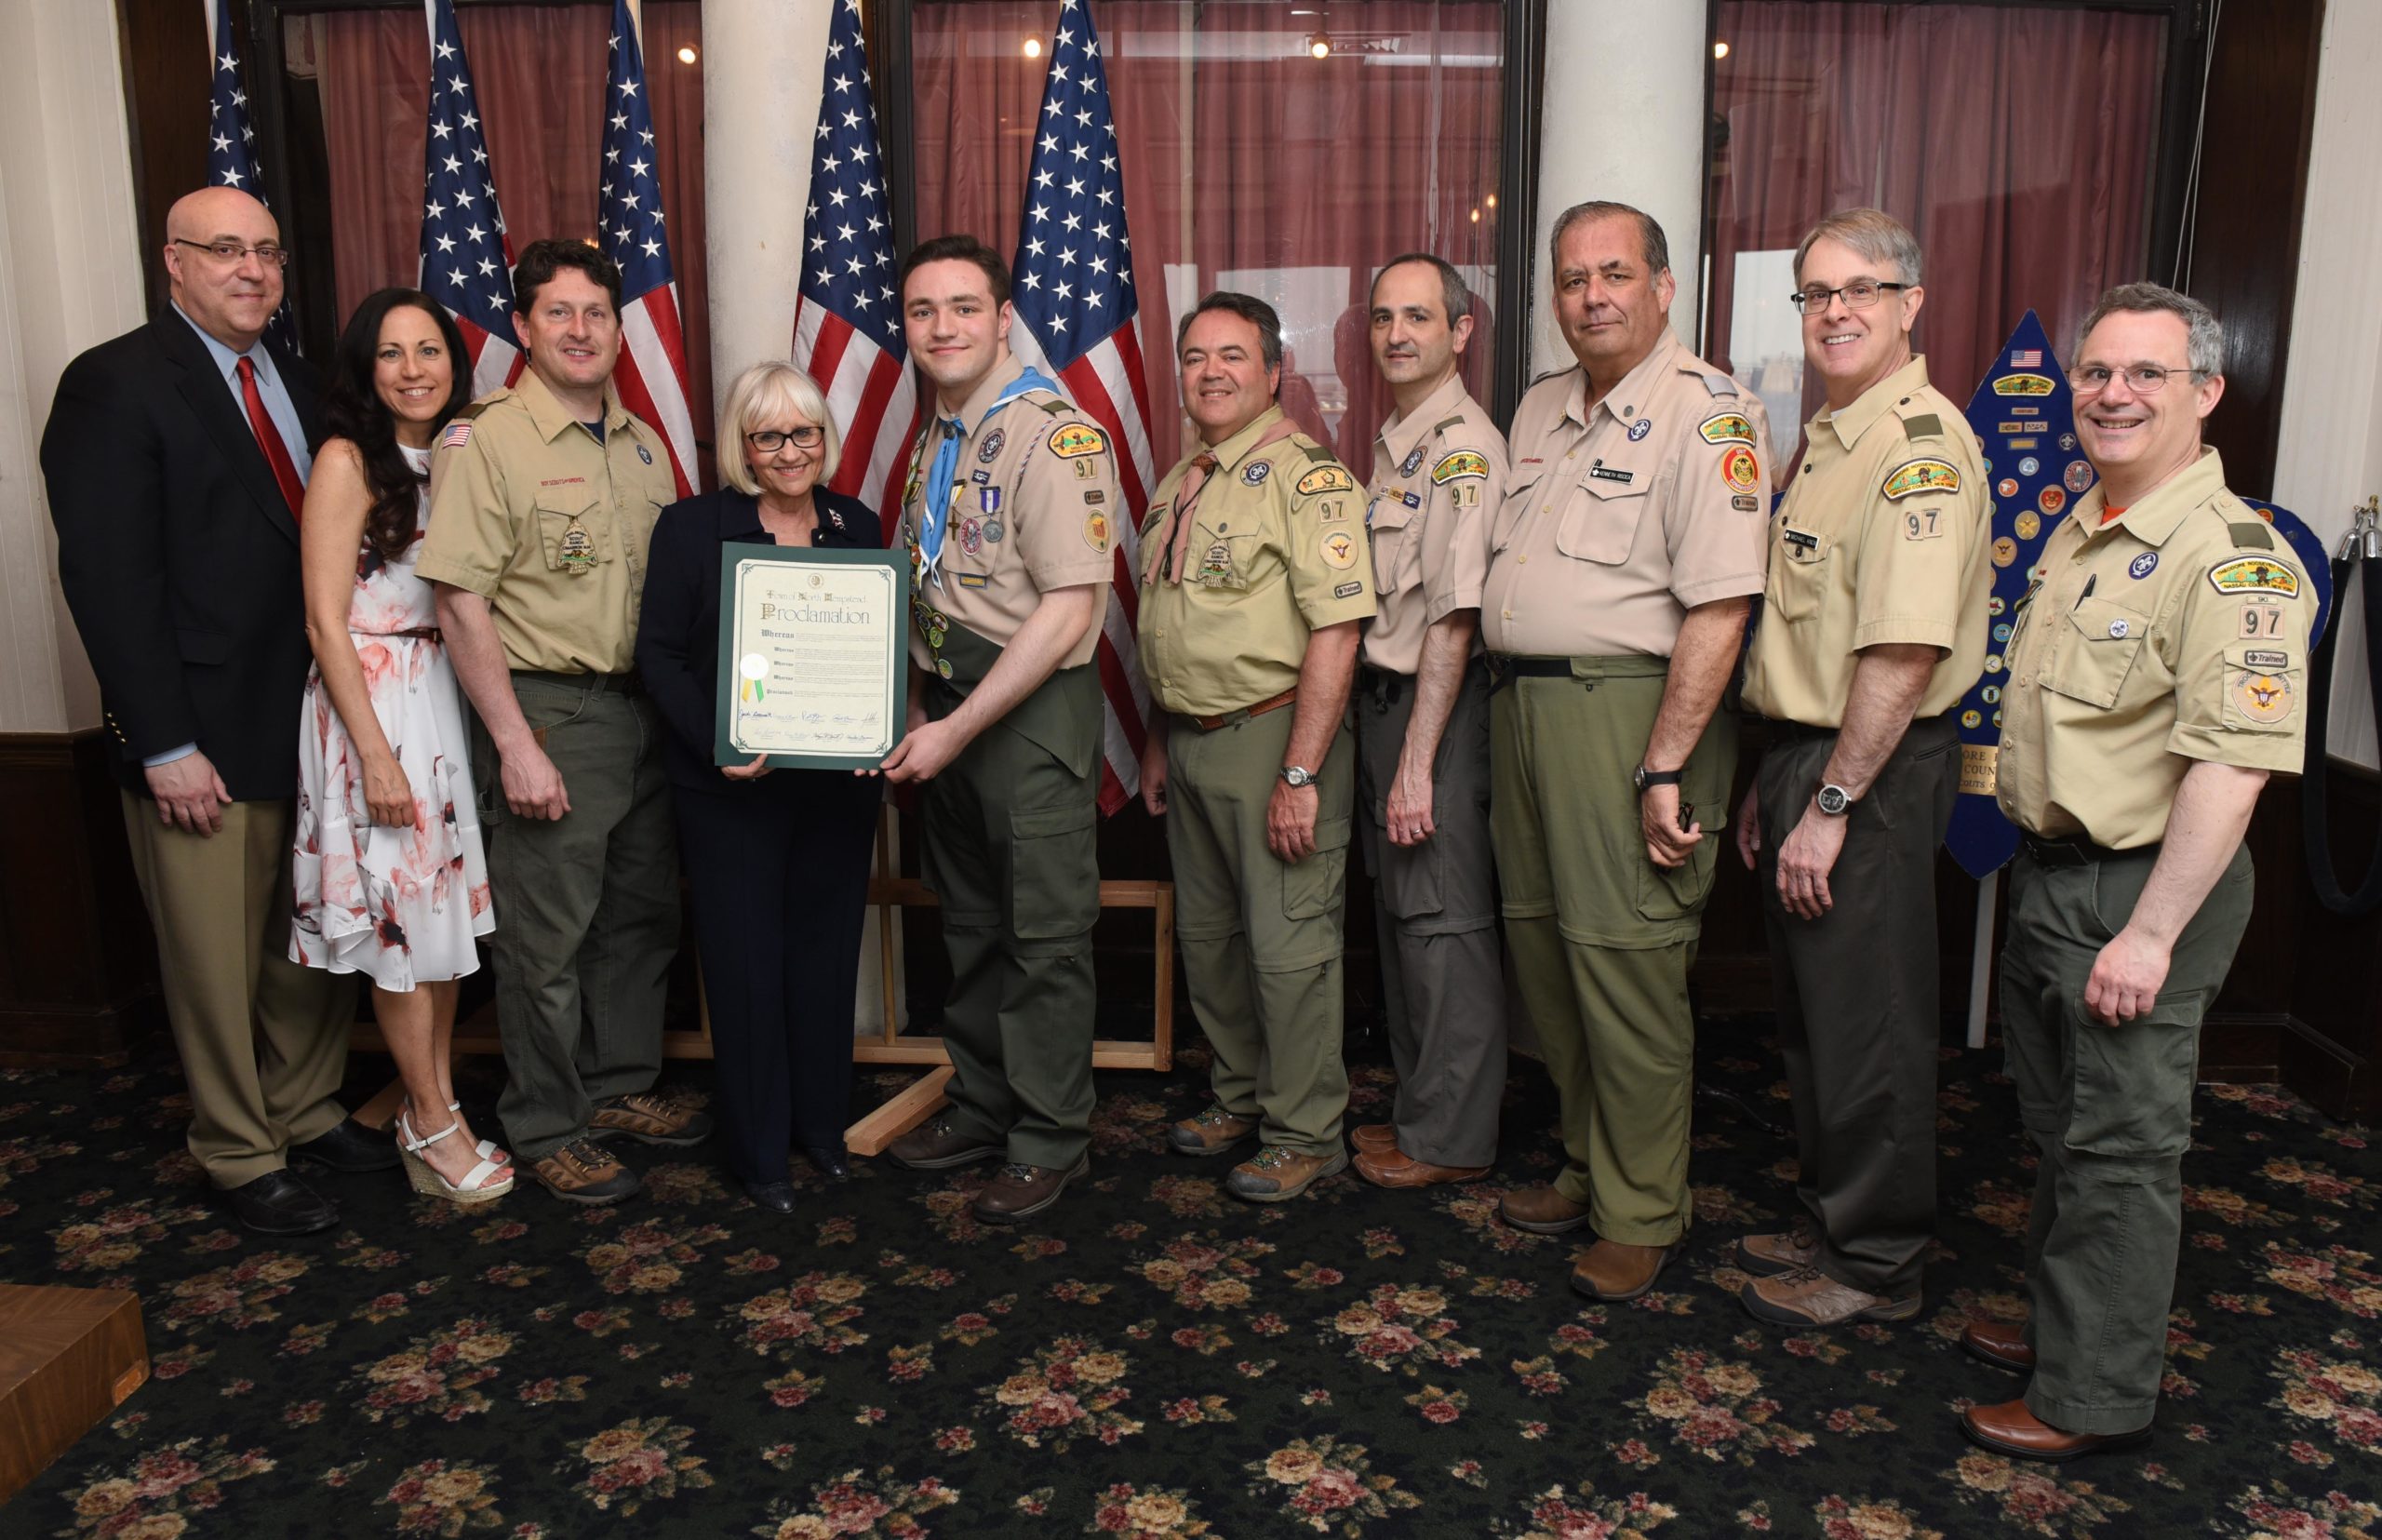 Joseph Cuomo, Jan Cuomo, Lee Decker, Supervisor Judi Bosworth, Jason Cuomo, John Walter, John D’Angelo, Ken Riscica, Mike Knox and Martin Miller at Jason Cuomo’s Eagle Scout Court of Honor Ceremony. (Photo courtesy of the Town of North Hempstead)